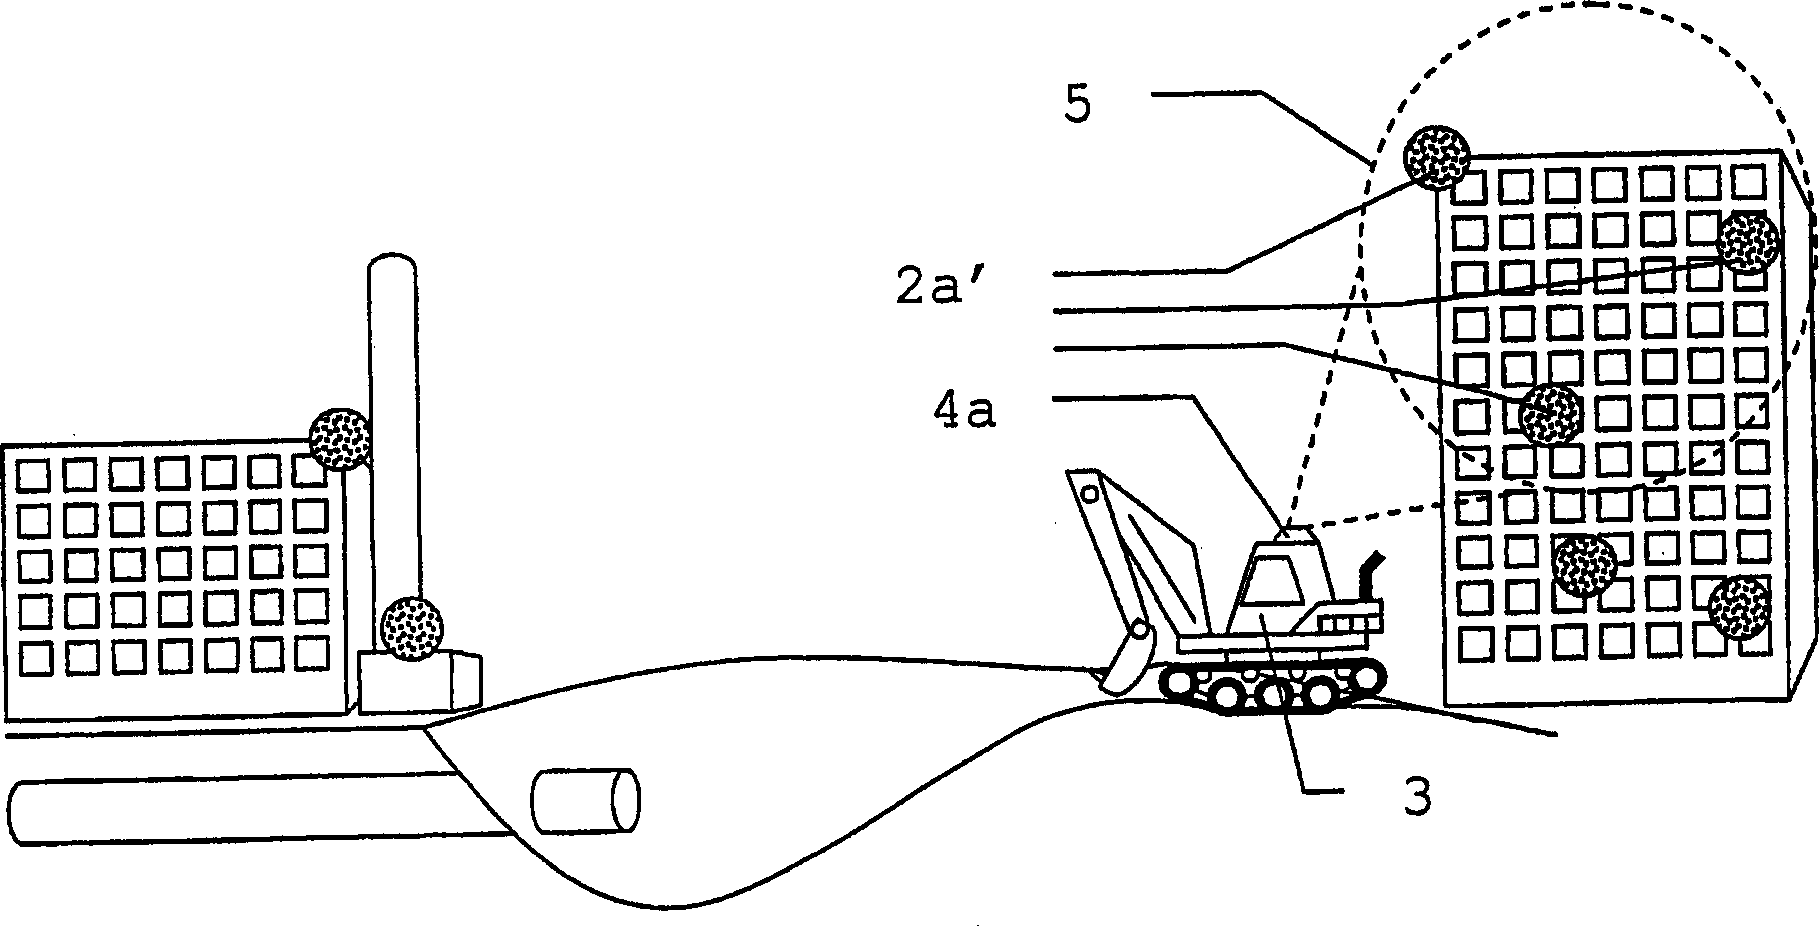 Method and system for determining the spatial position of a hand-held measuring appliance